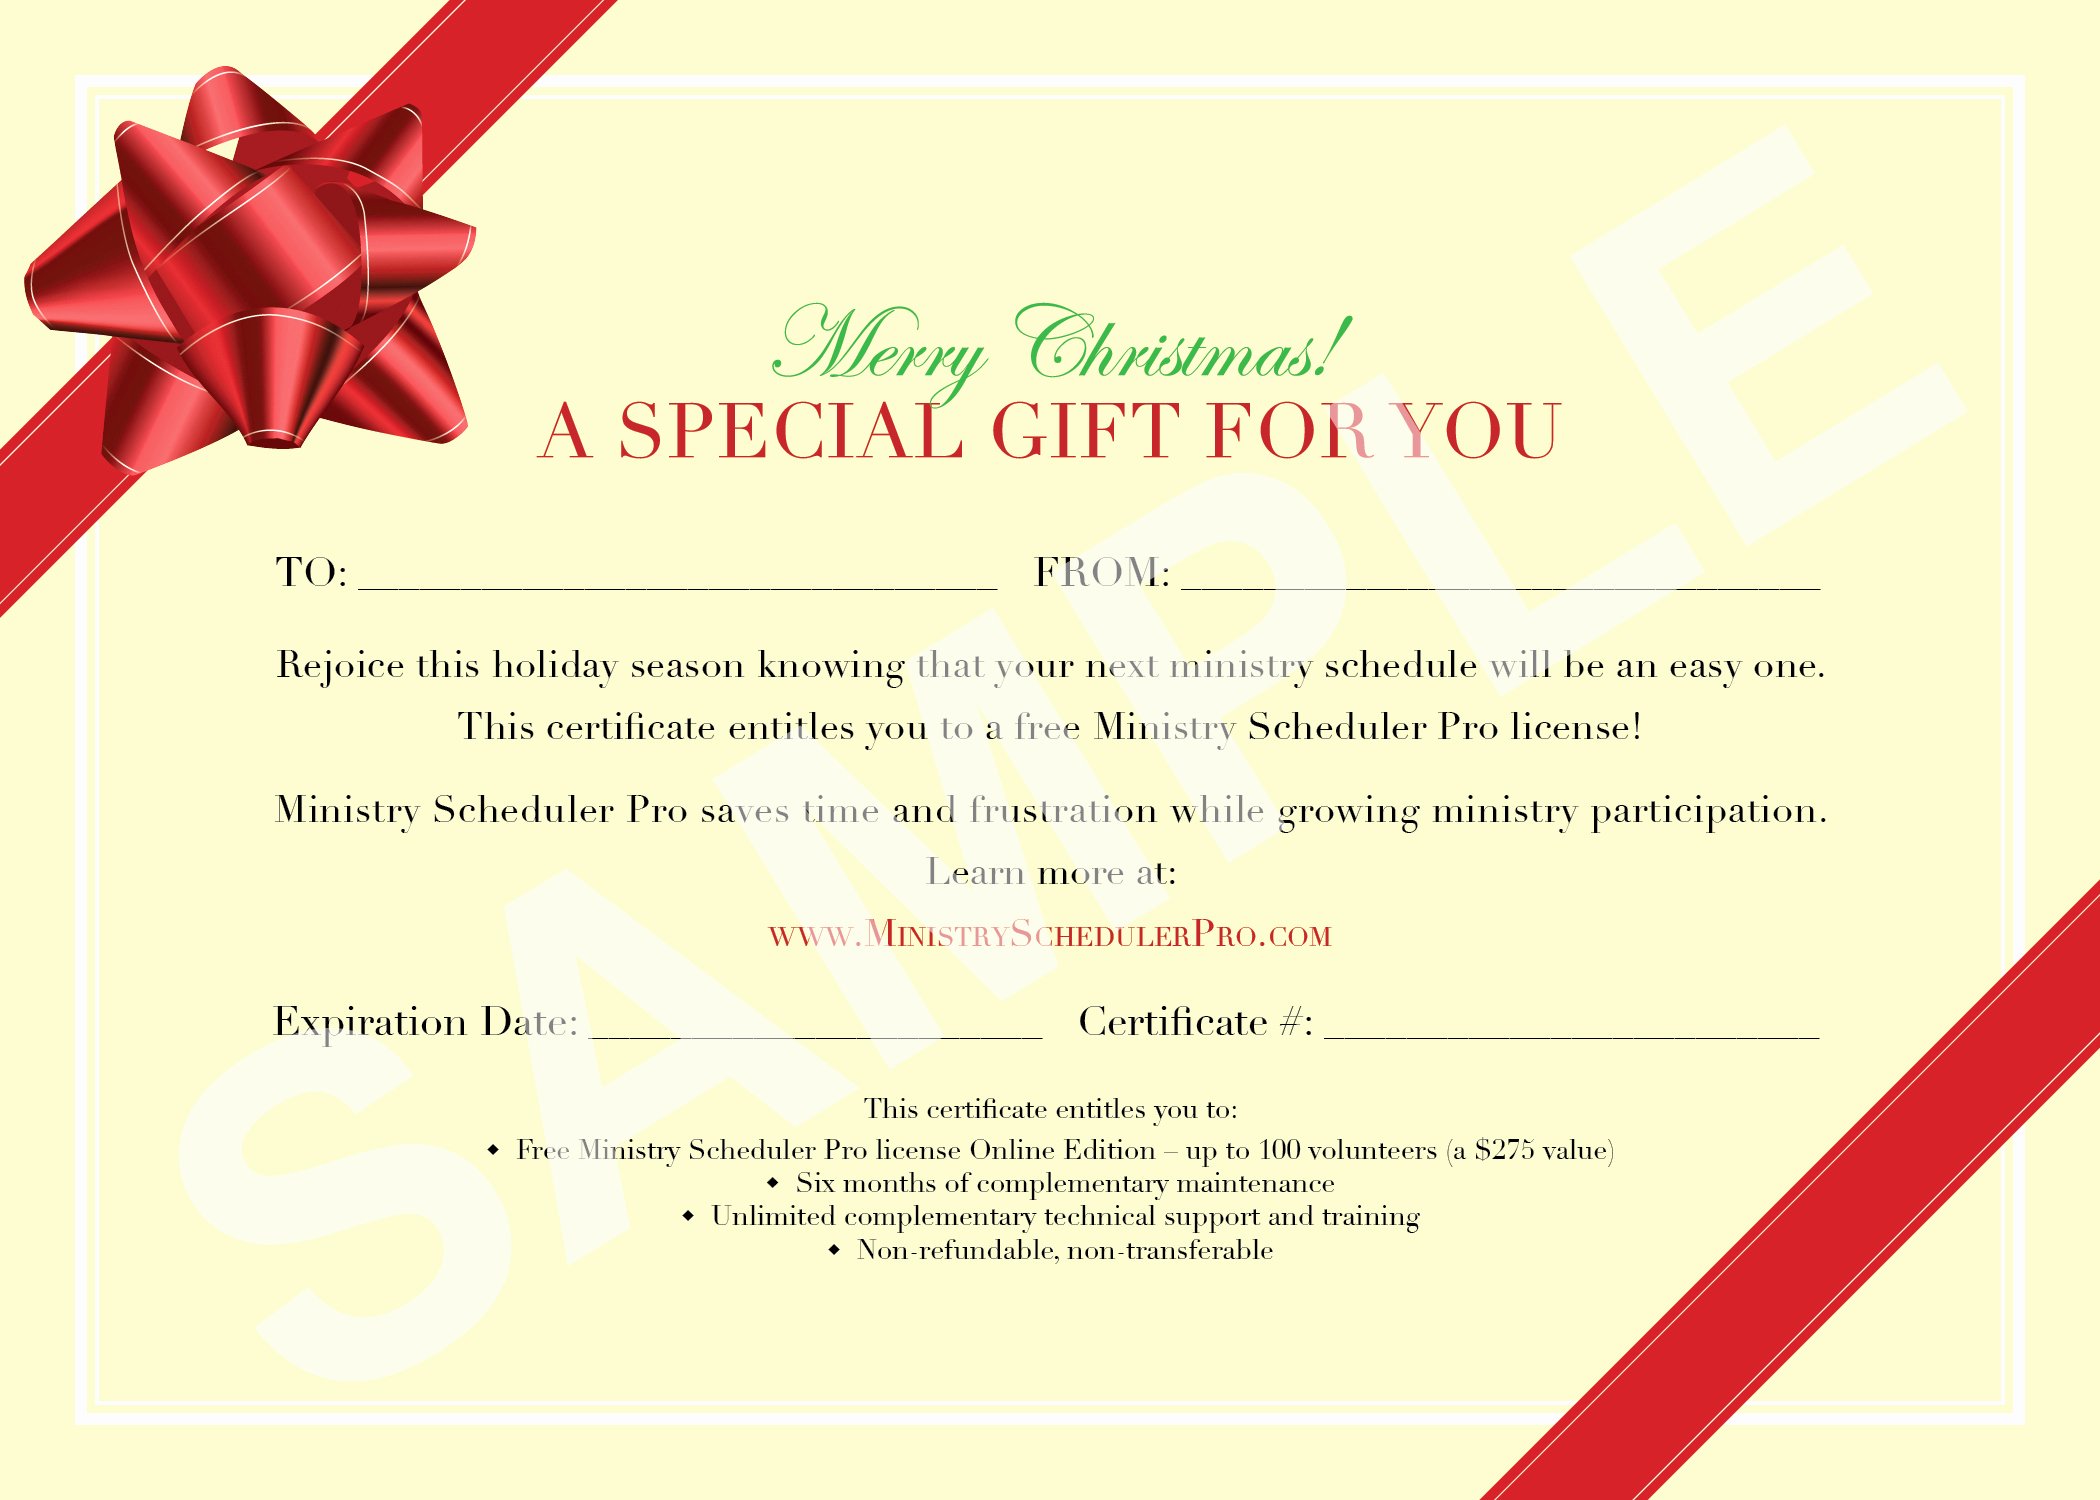 Photography Gift Certificate Wording Best Of Christmas Gift Voucher Design Template with Red Ribbon and Beige Background Color and Green Red